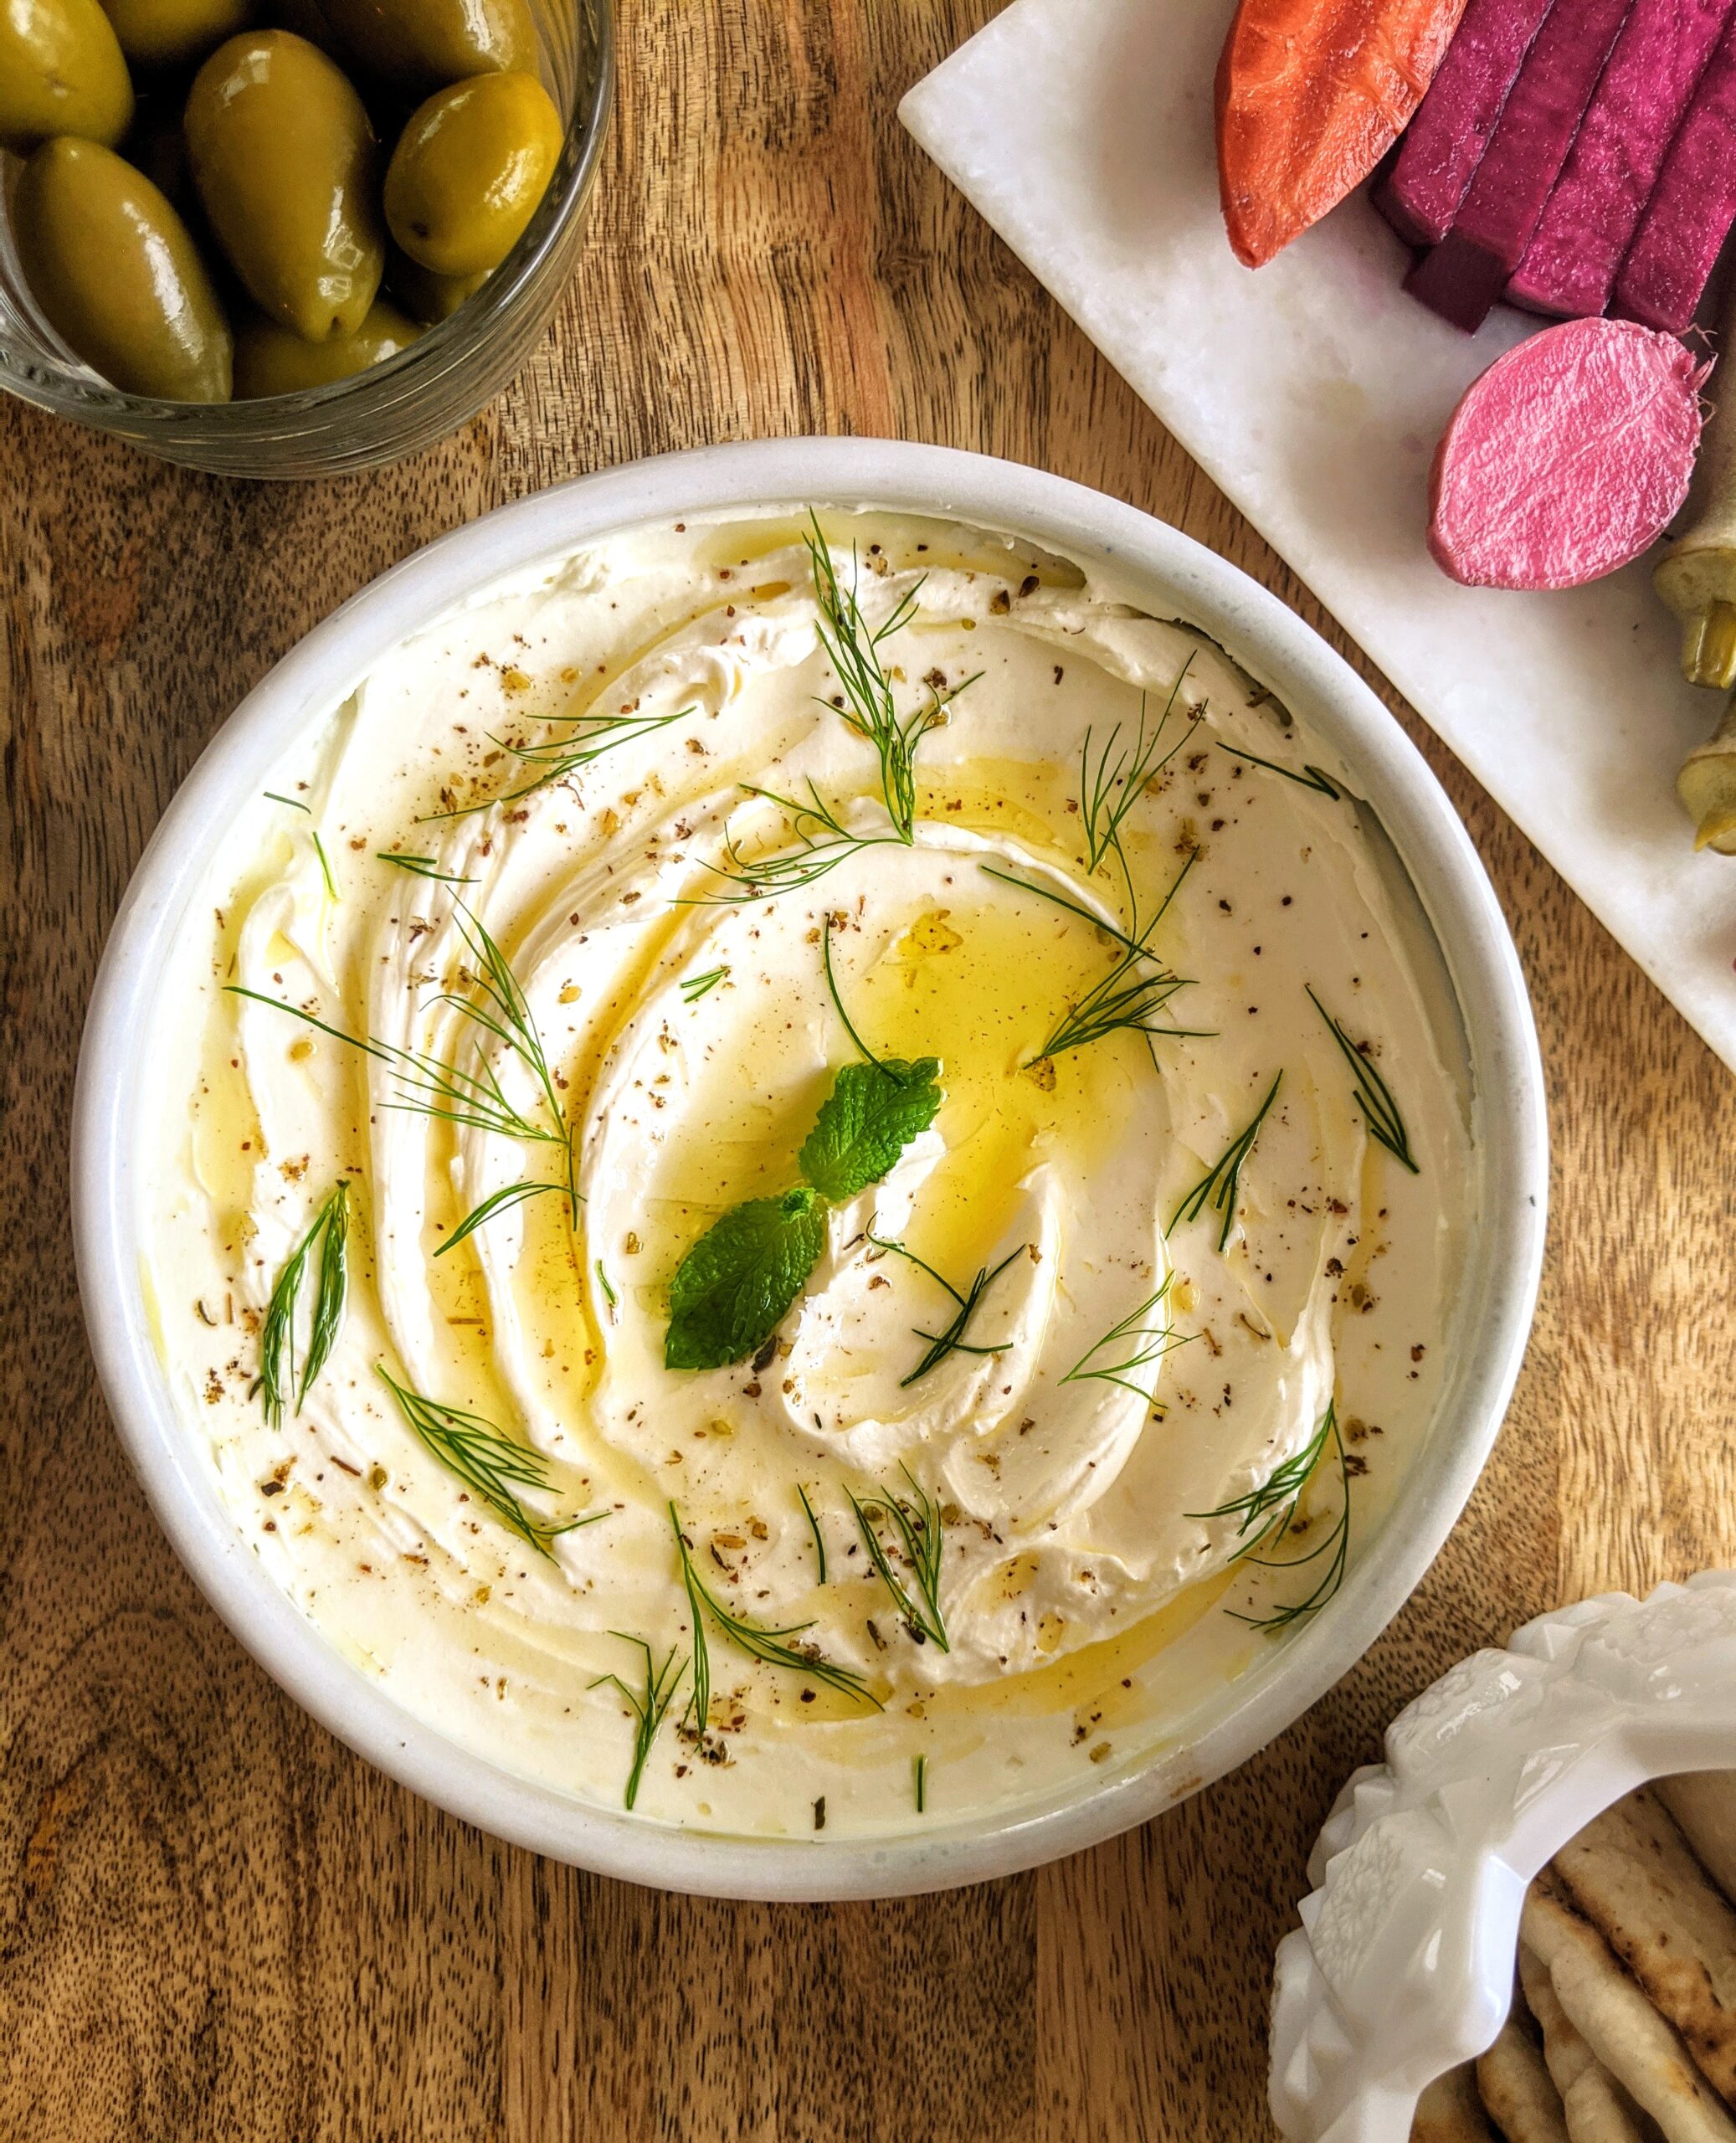 A shallow bowl of homemade labneh swooshed and swirled with a spoon to add dimension. Garnished with a drizzle of extra-virgin olive oil, mint leaves, torn dill, and a light sprinkle of za'atar. Served alongside a variety of homemade pickled vegetables, warm pita bread, and Cerignola olives.